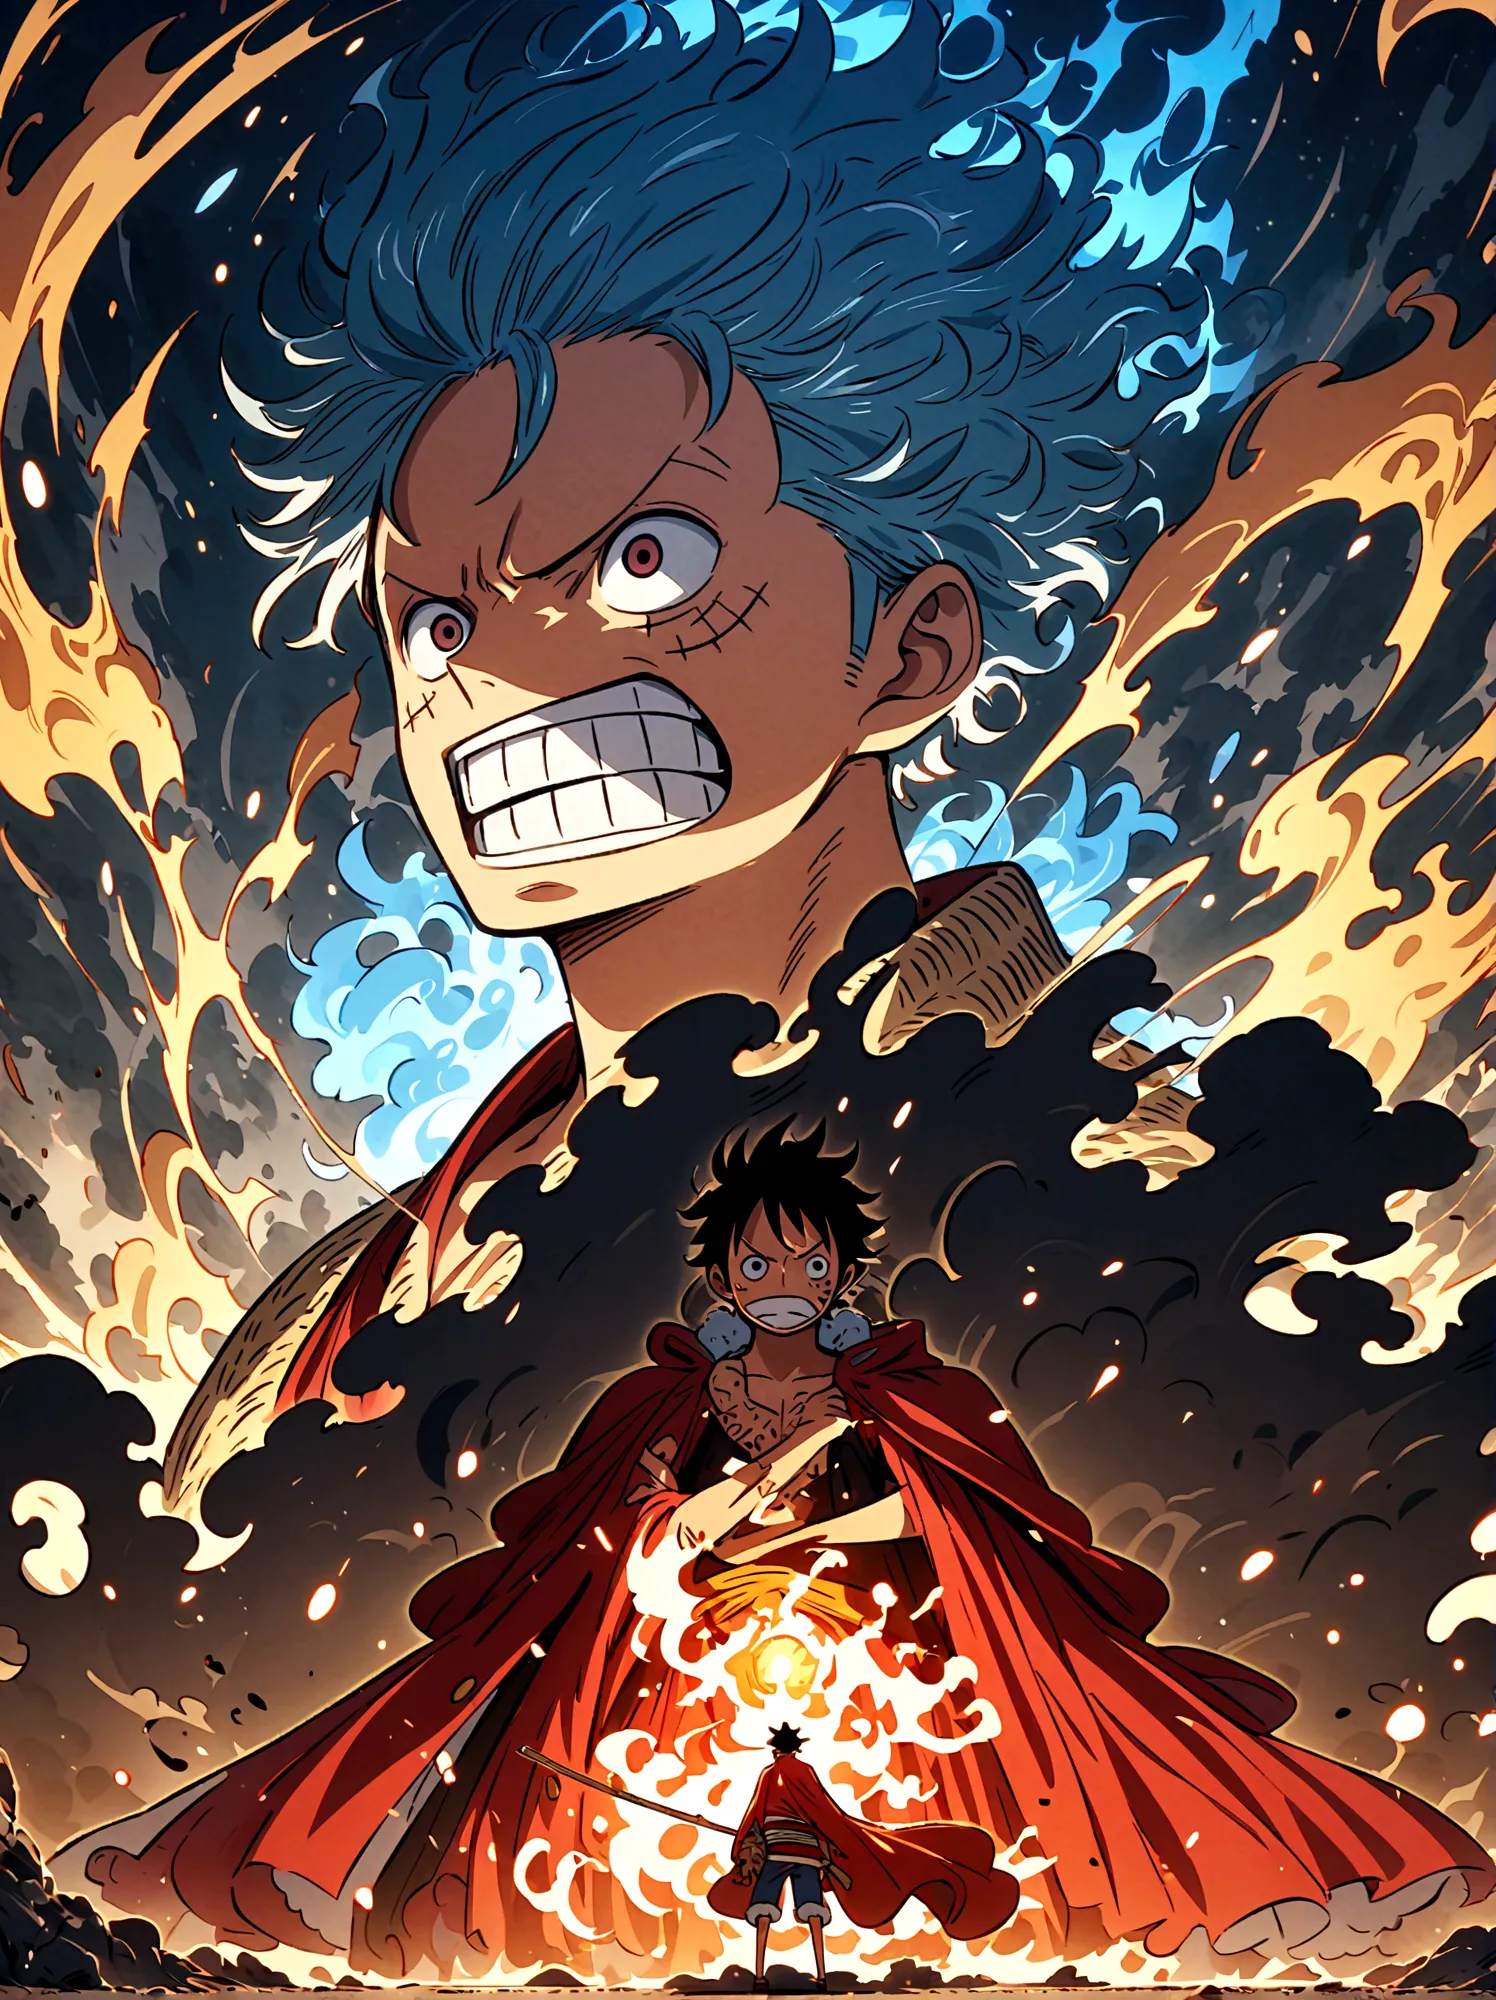 Create an exciting poster with Luffy from "one piece" em um ataque de raiva, wolf-headed. Capture the essence of his fiery deter...